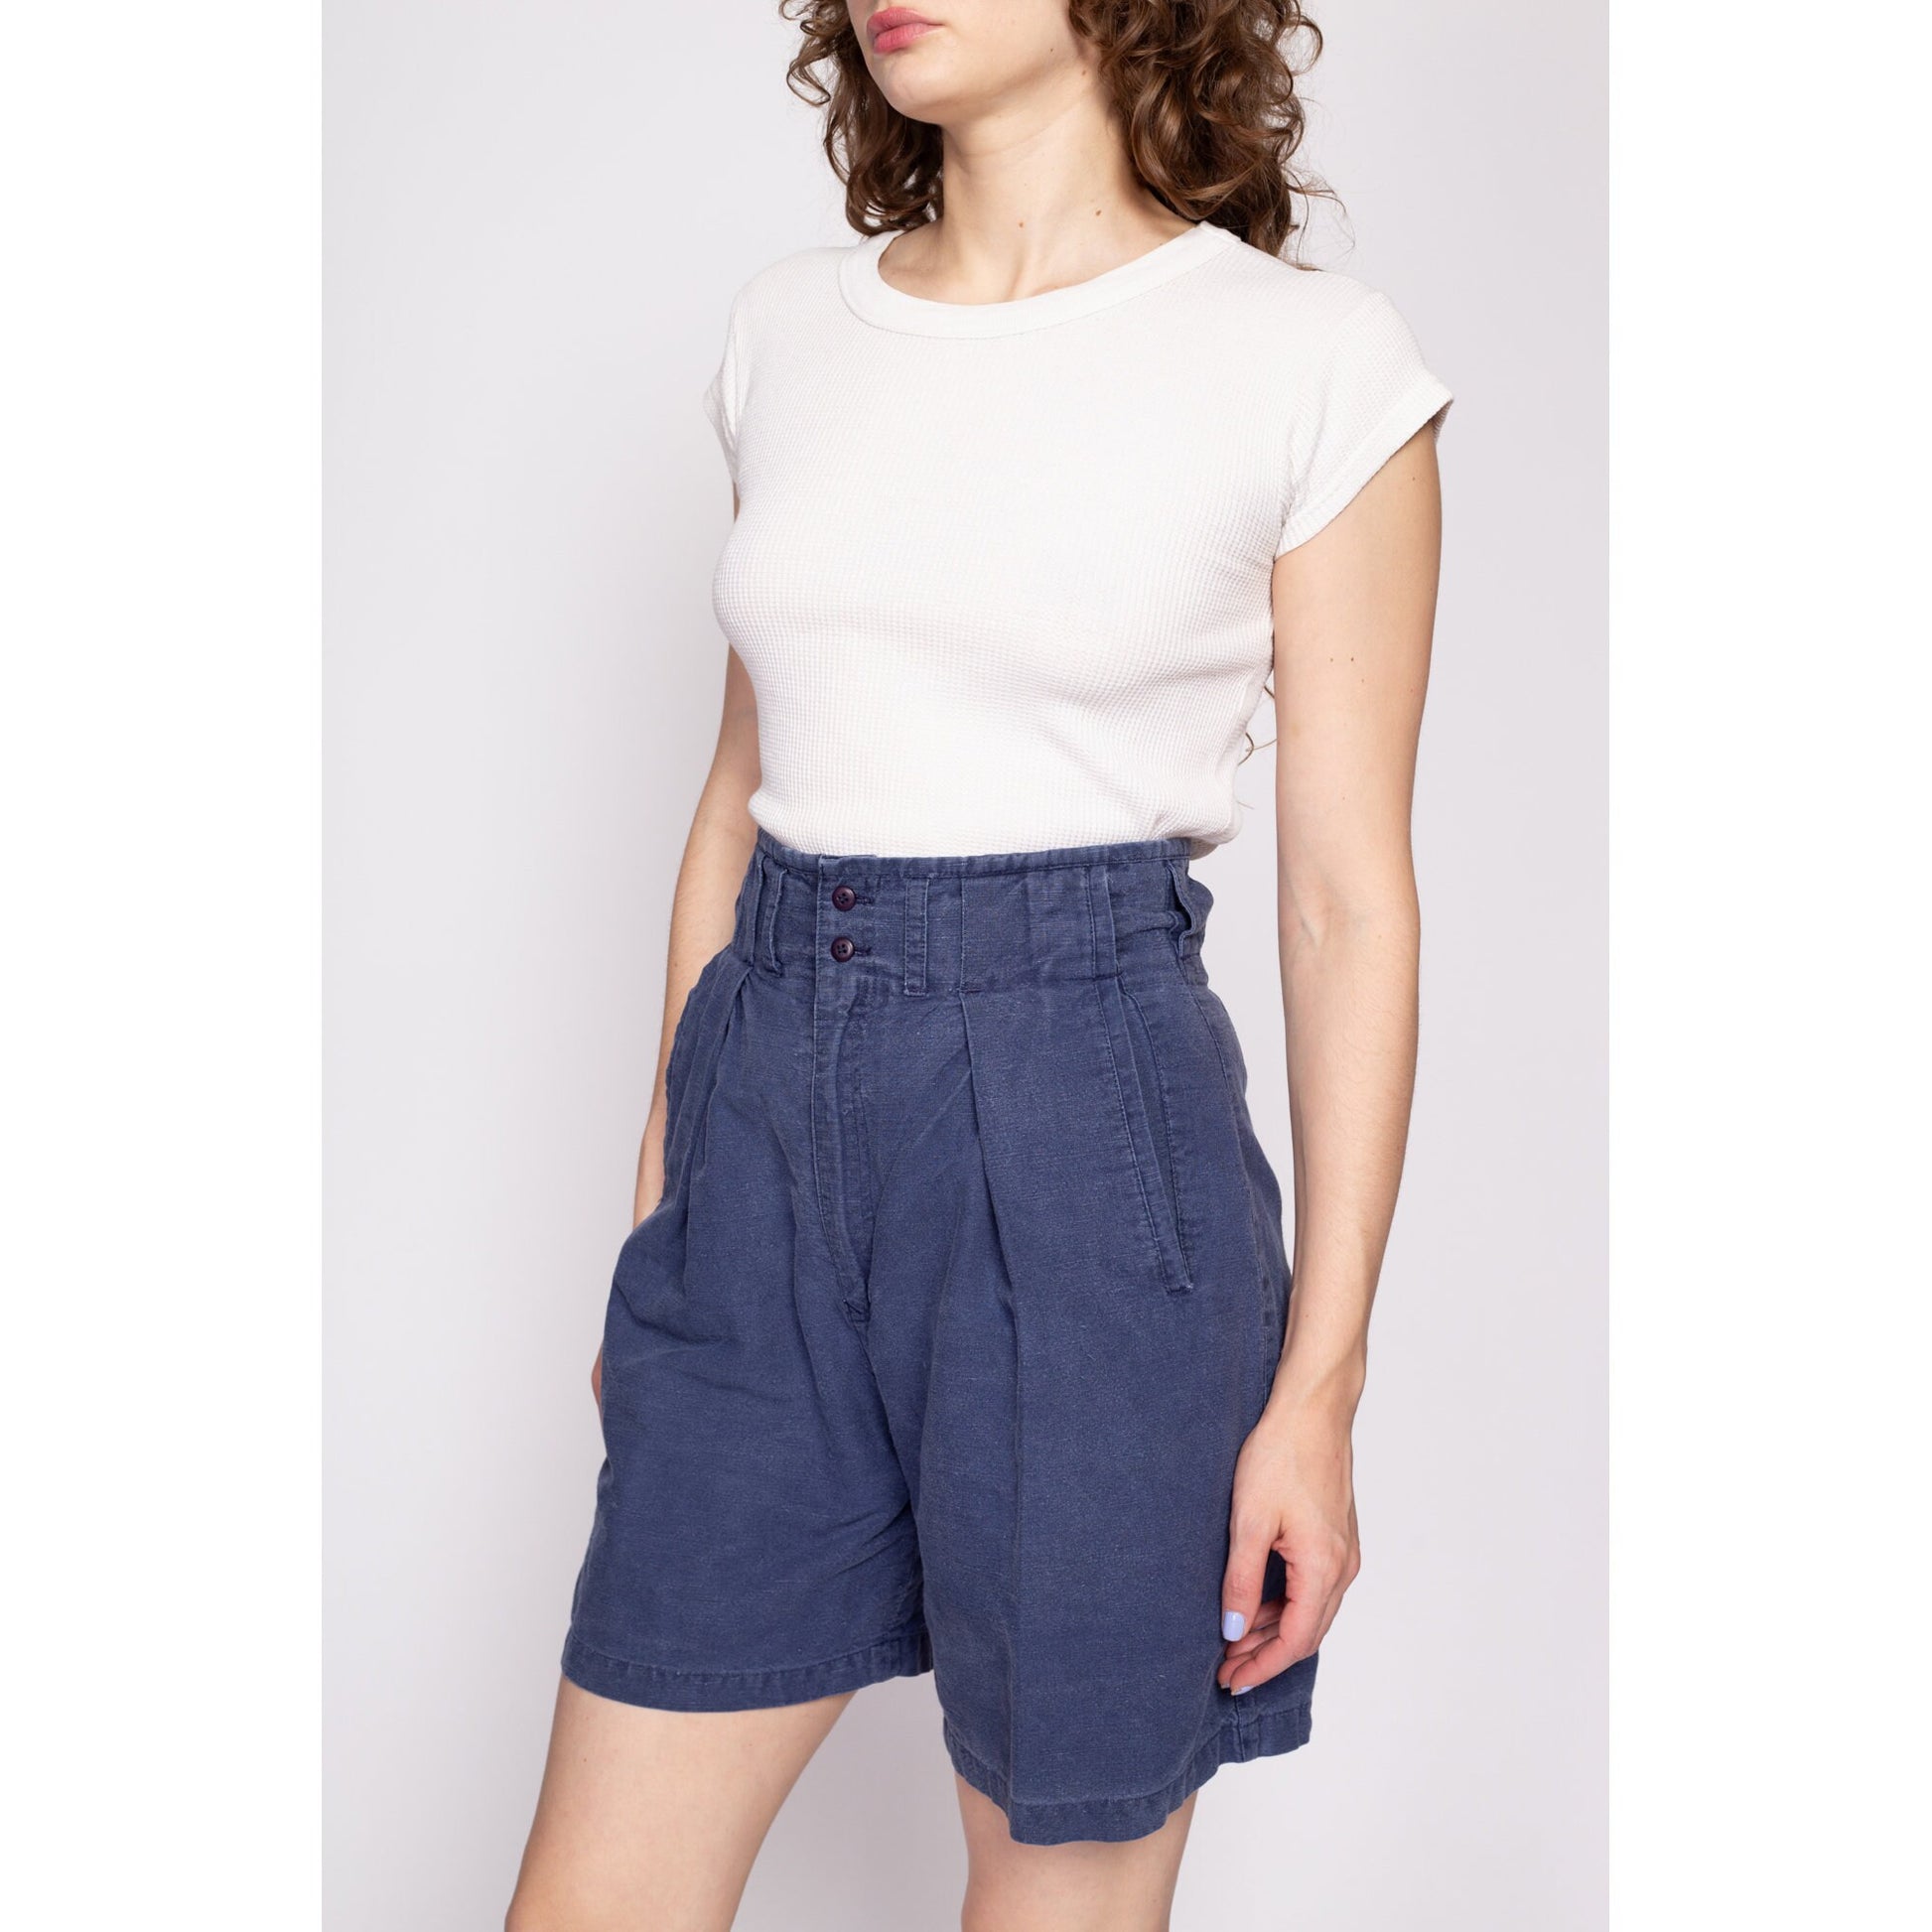 90s Faded Navy Blue High Waisted Shorts - Small to Medium, 27.5" | Vintage Cotton Casual Pleated Shorts